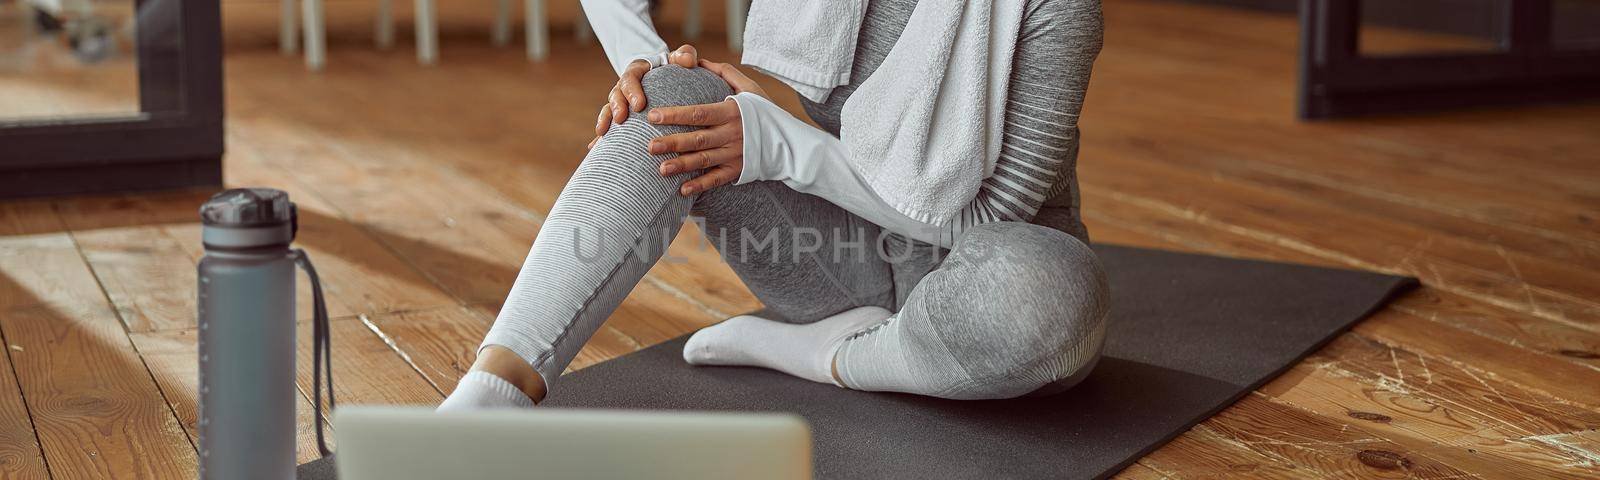 Female is sitting on mat and touching joint while suffering pain during video workout on laptop at home